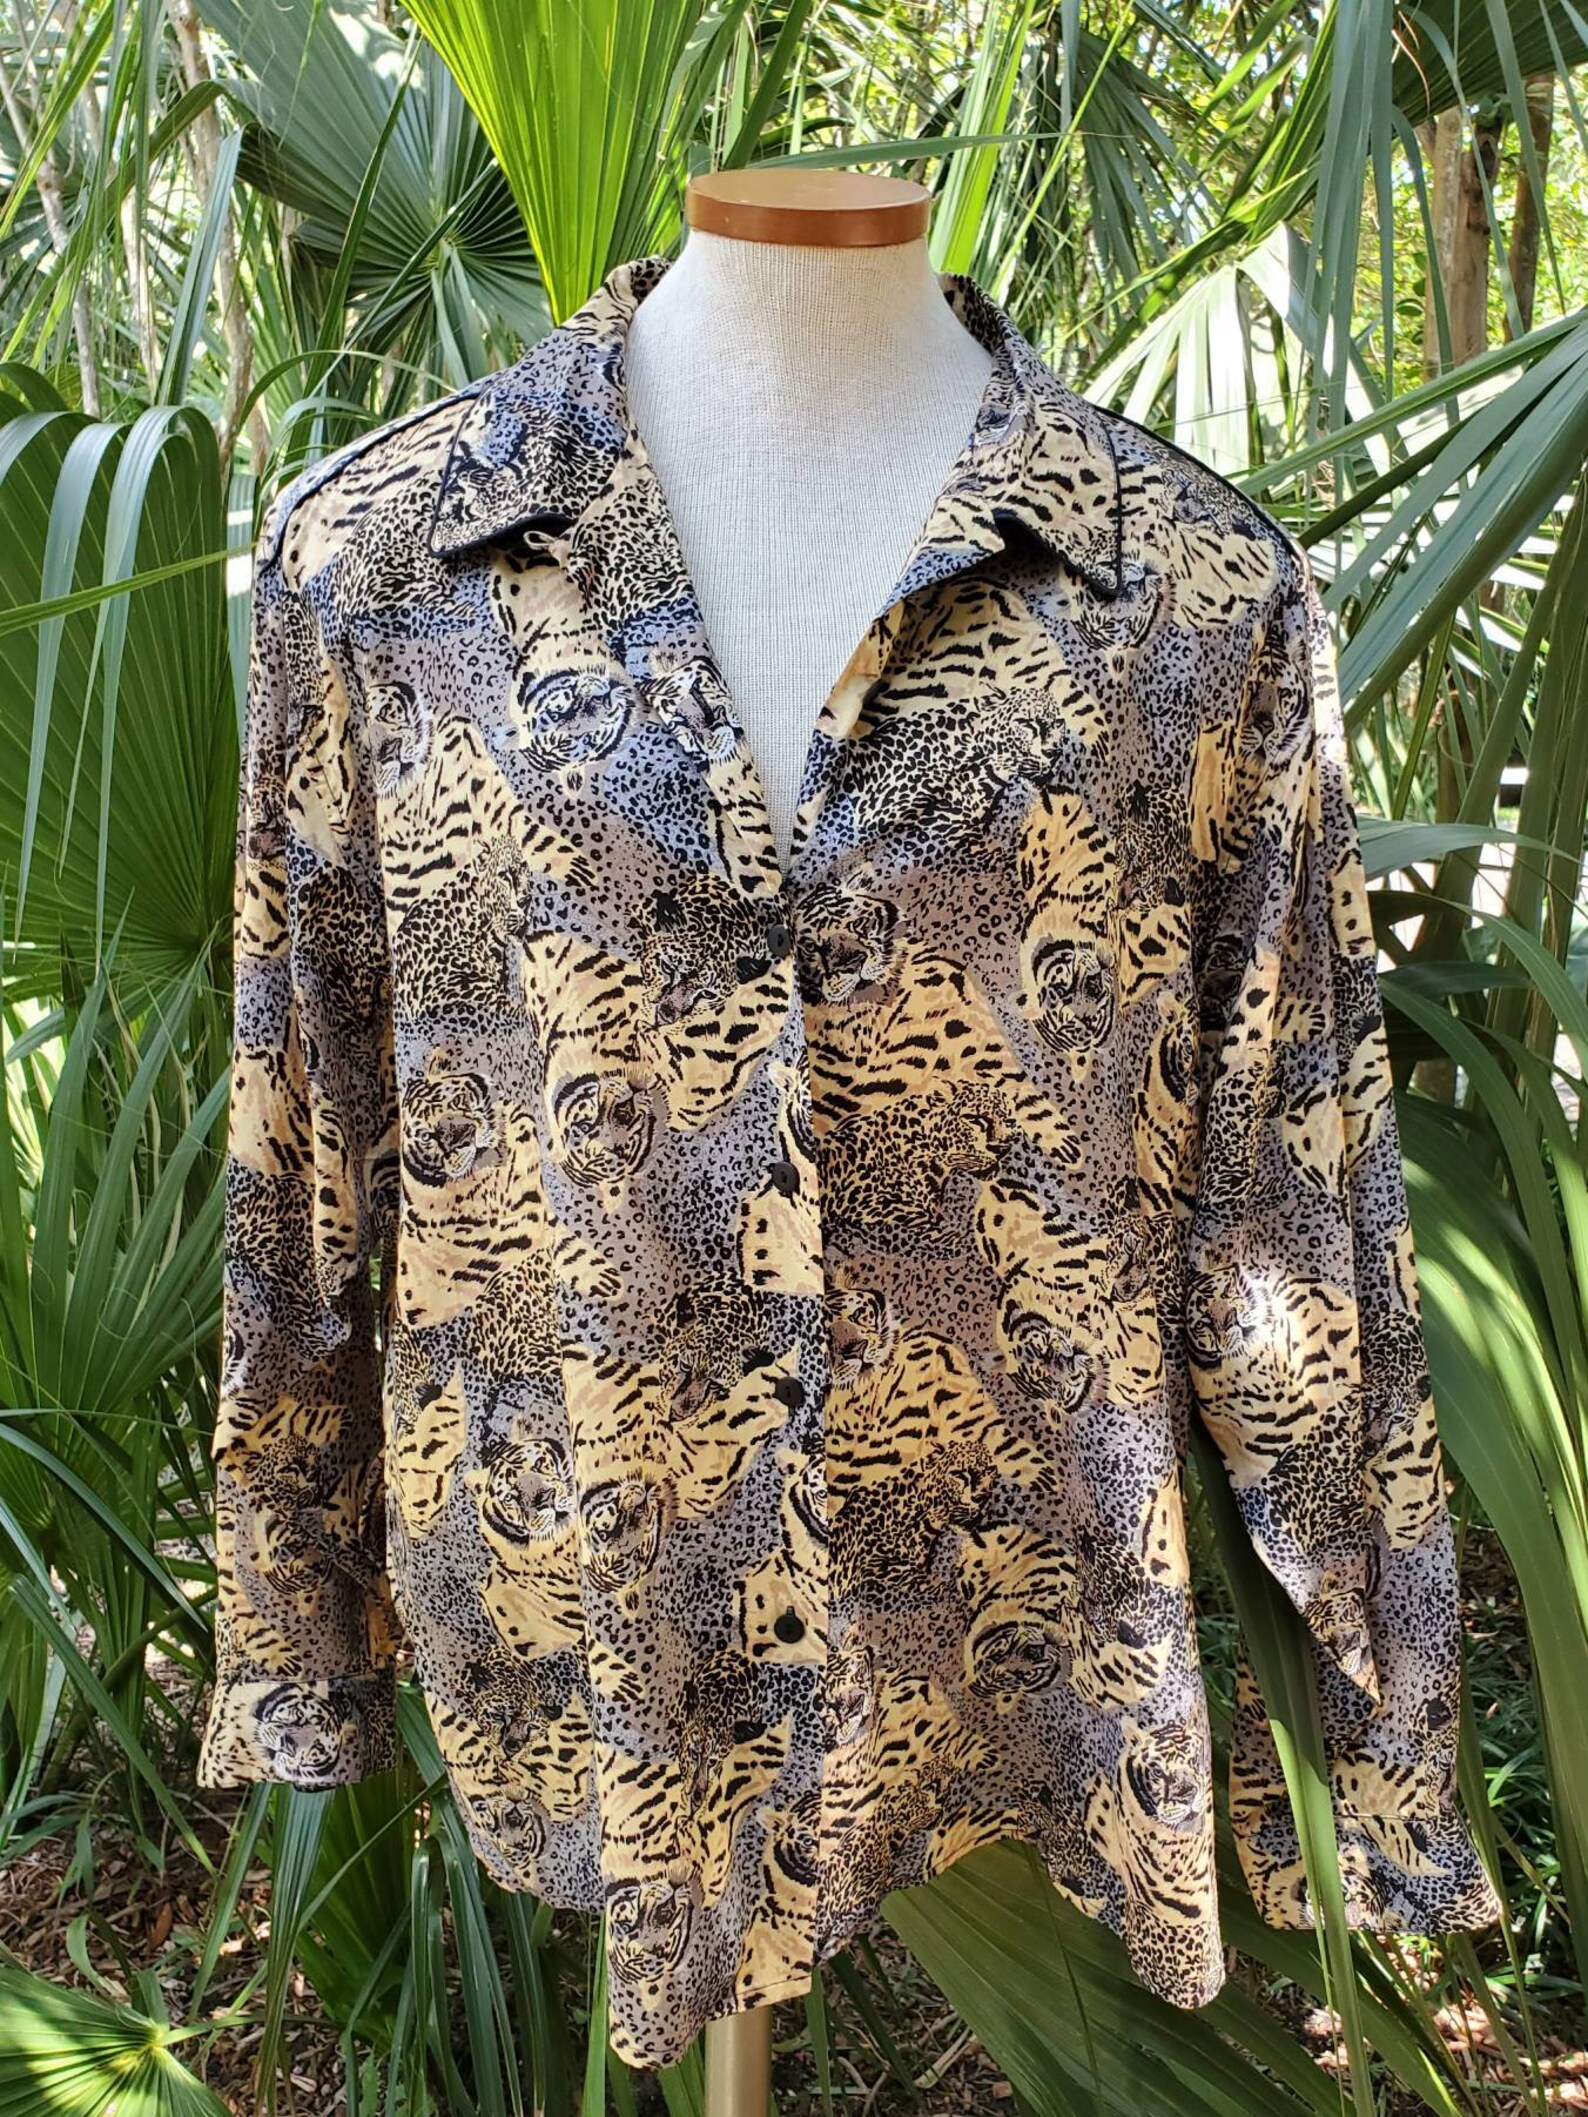 Vintage 1980s Anna and Frank Leopard Tiger Print Silk Blouse | Etsy